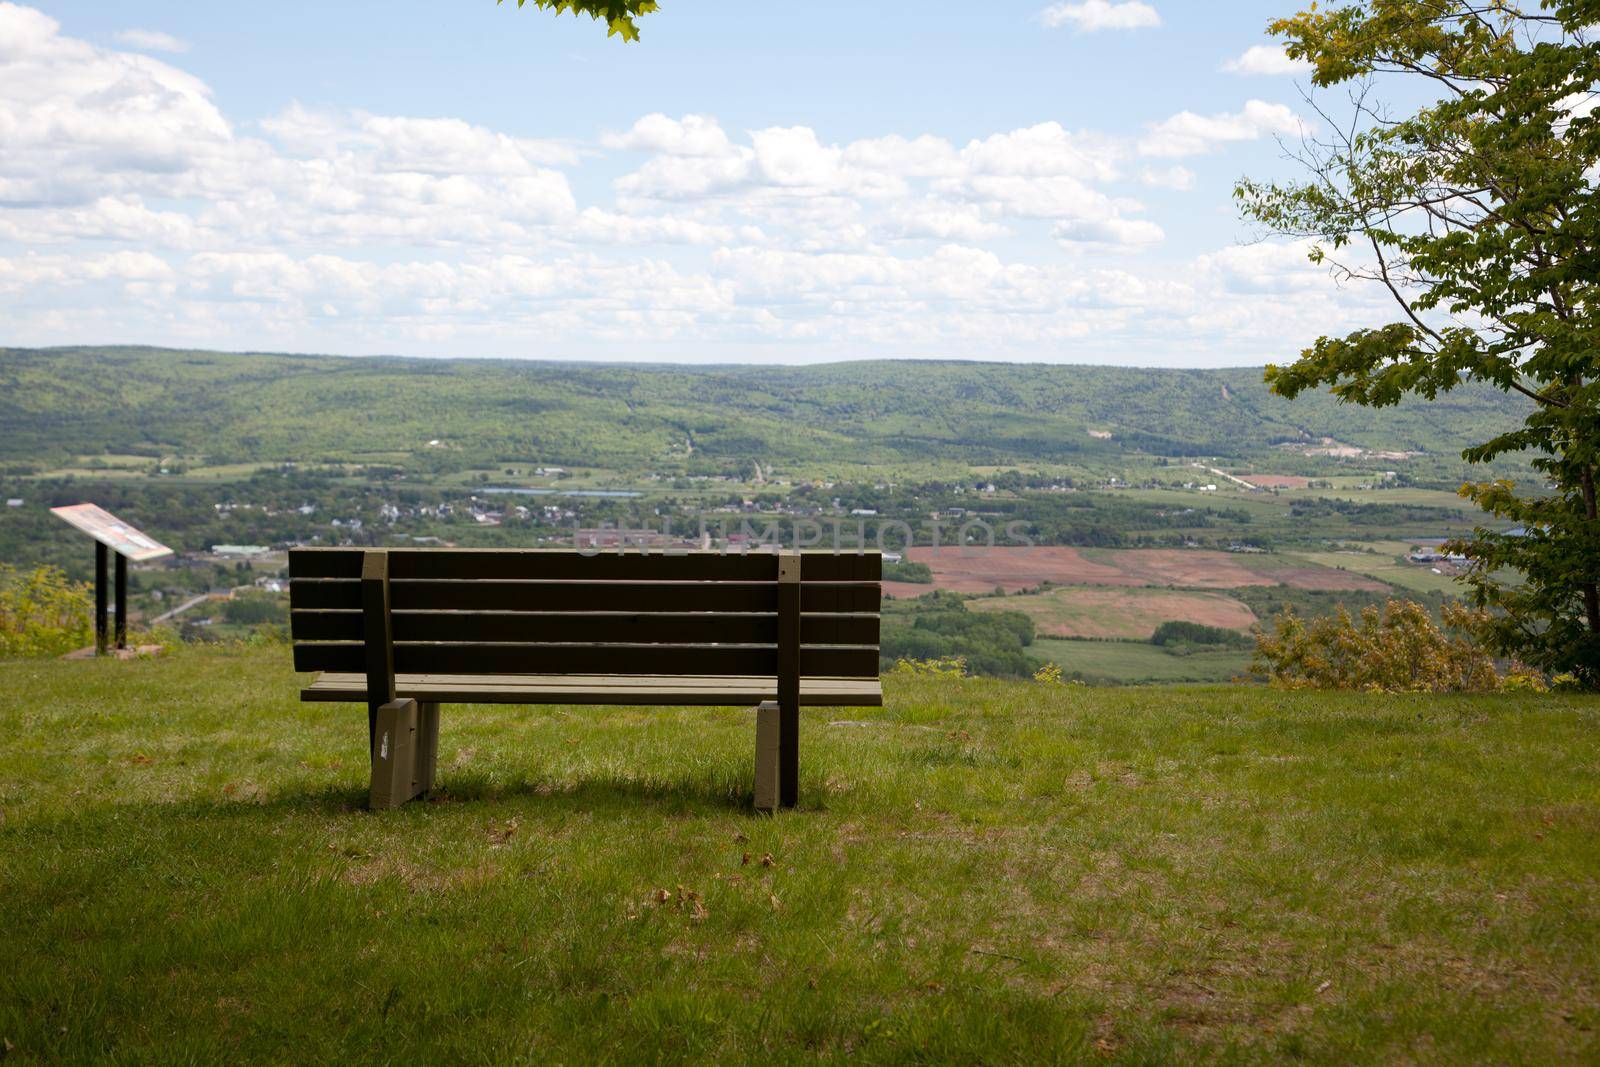 Bench at Valleyview by rustycanuck